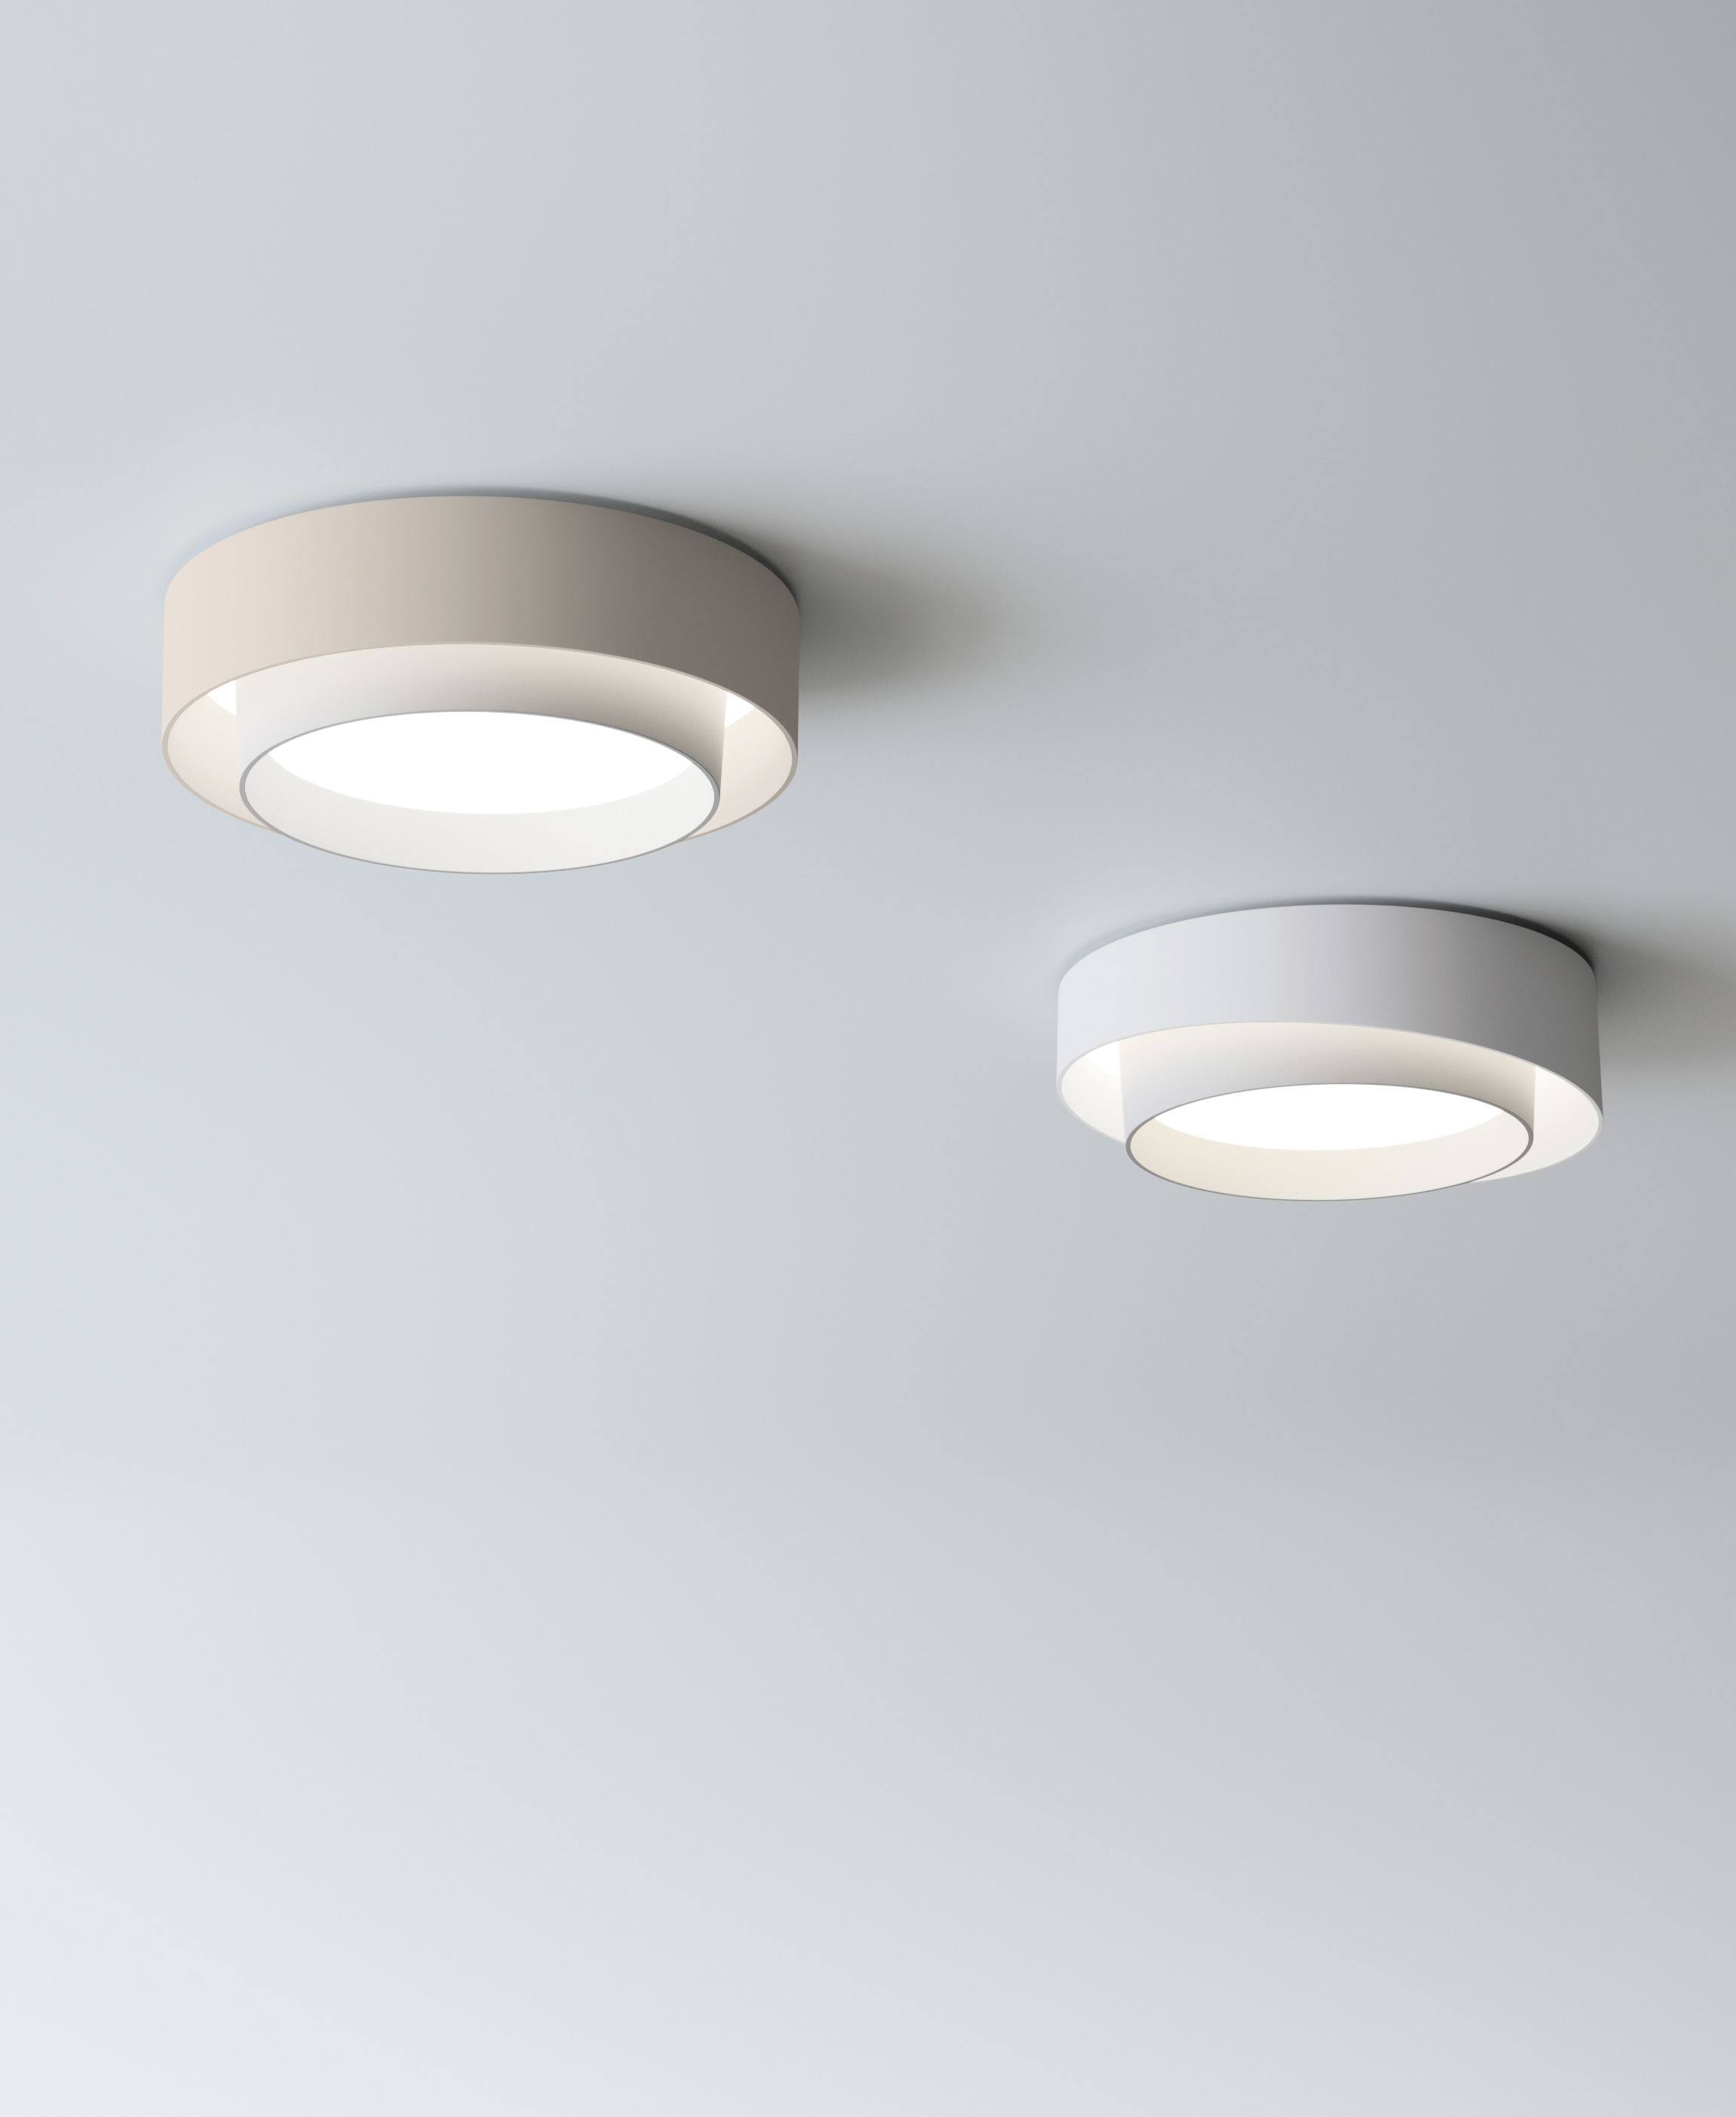 Overhead lamp Centric by Vibia